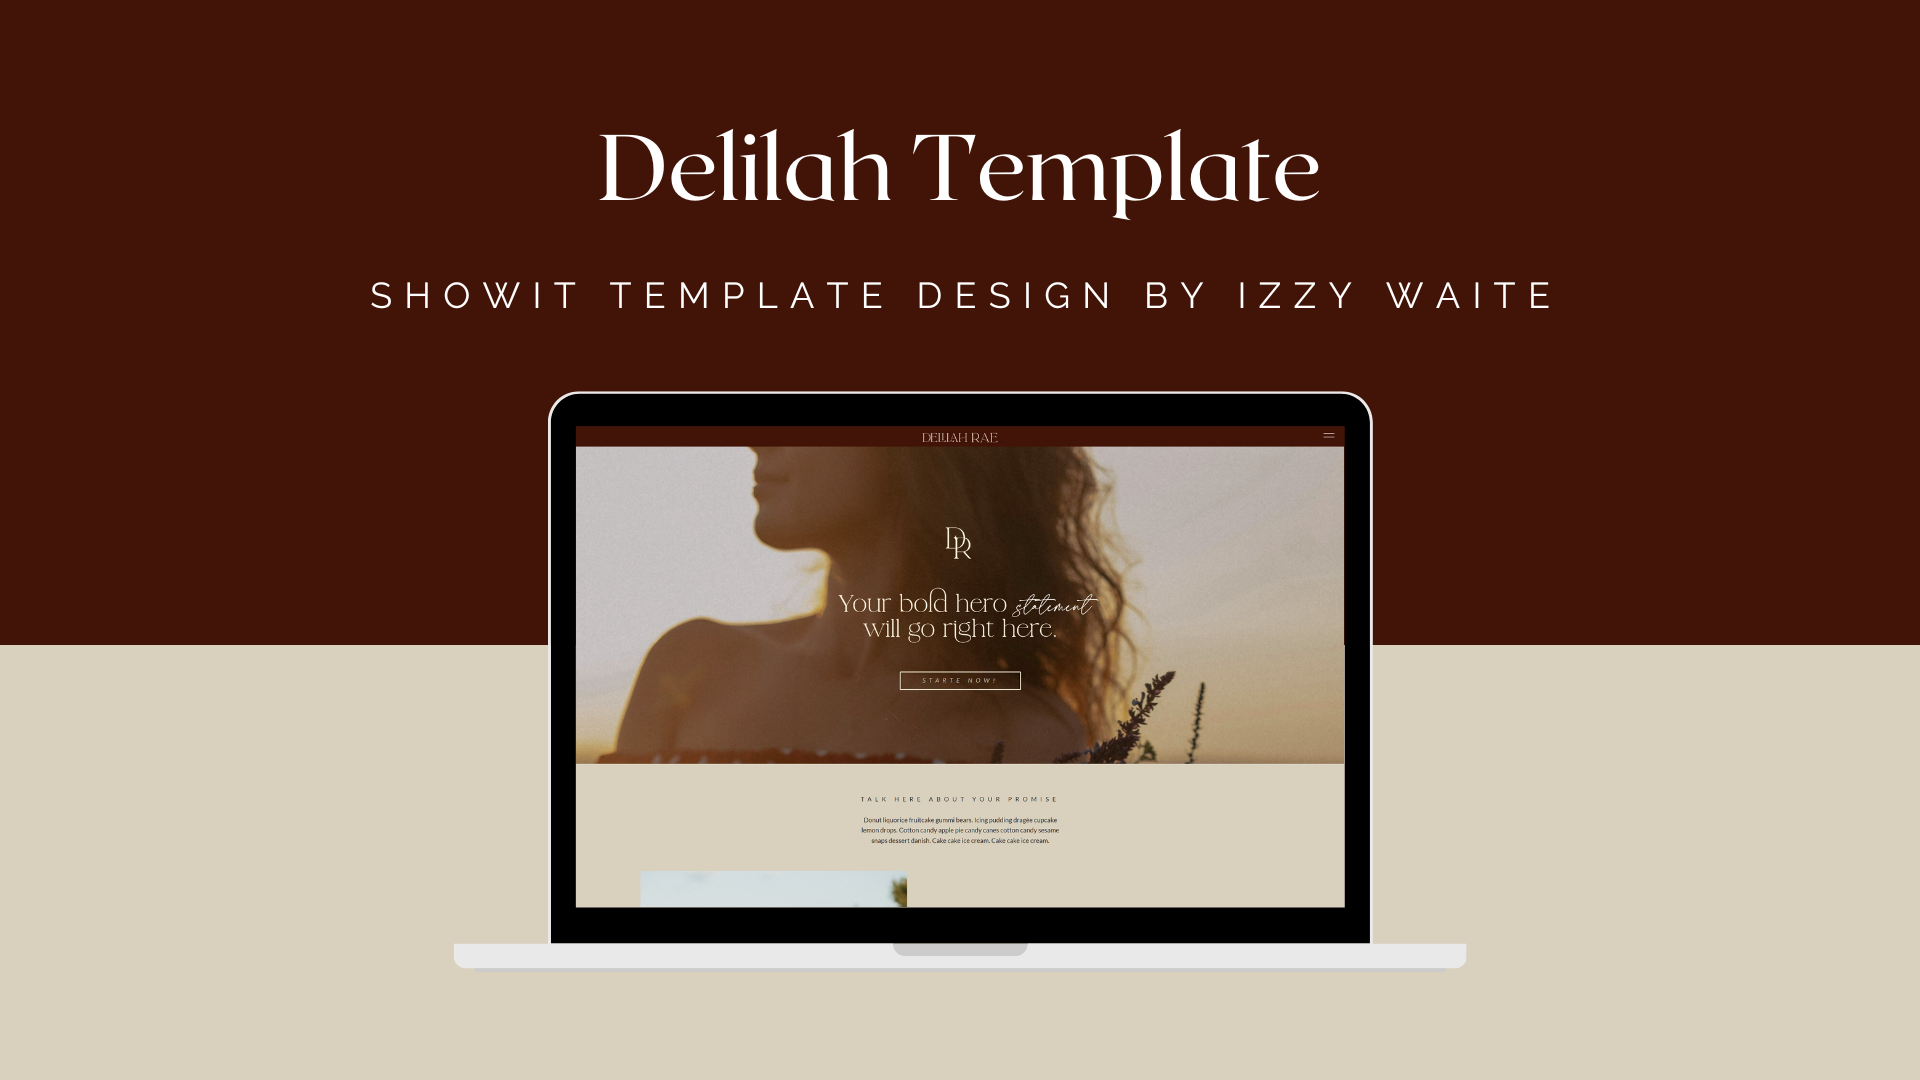 Delilah Template | Showit template design by Izzy Waite